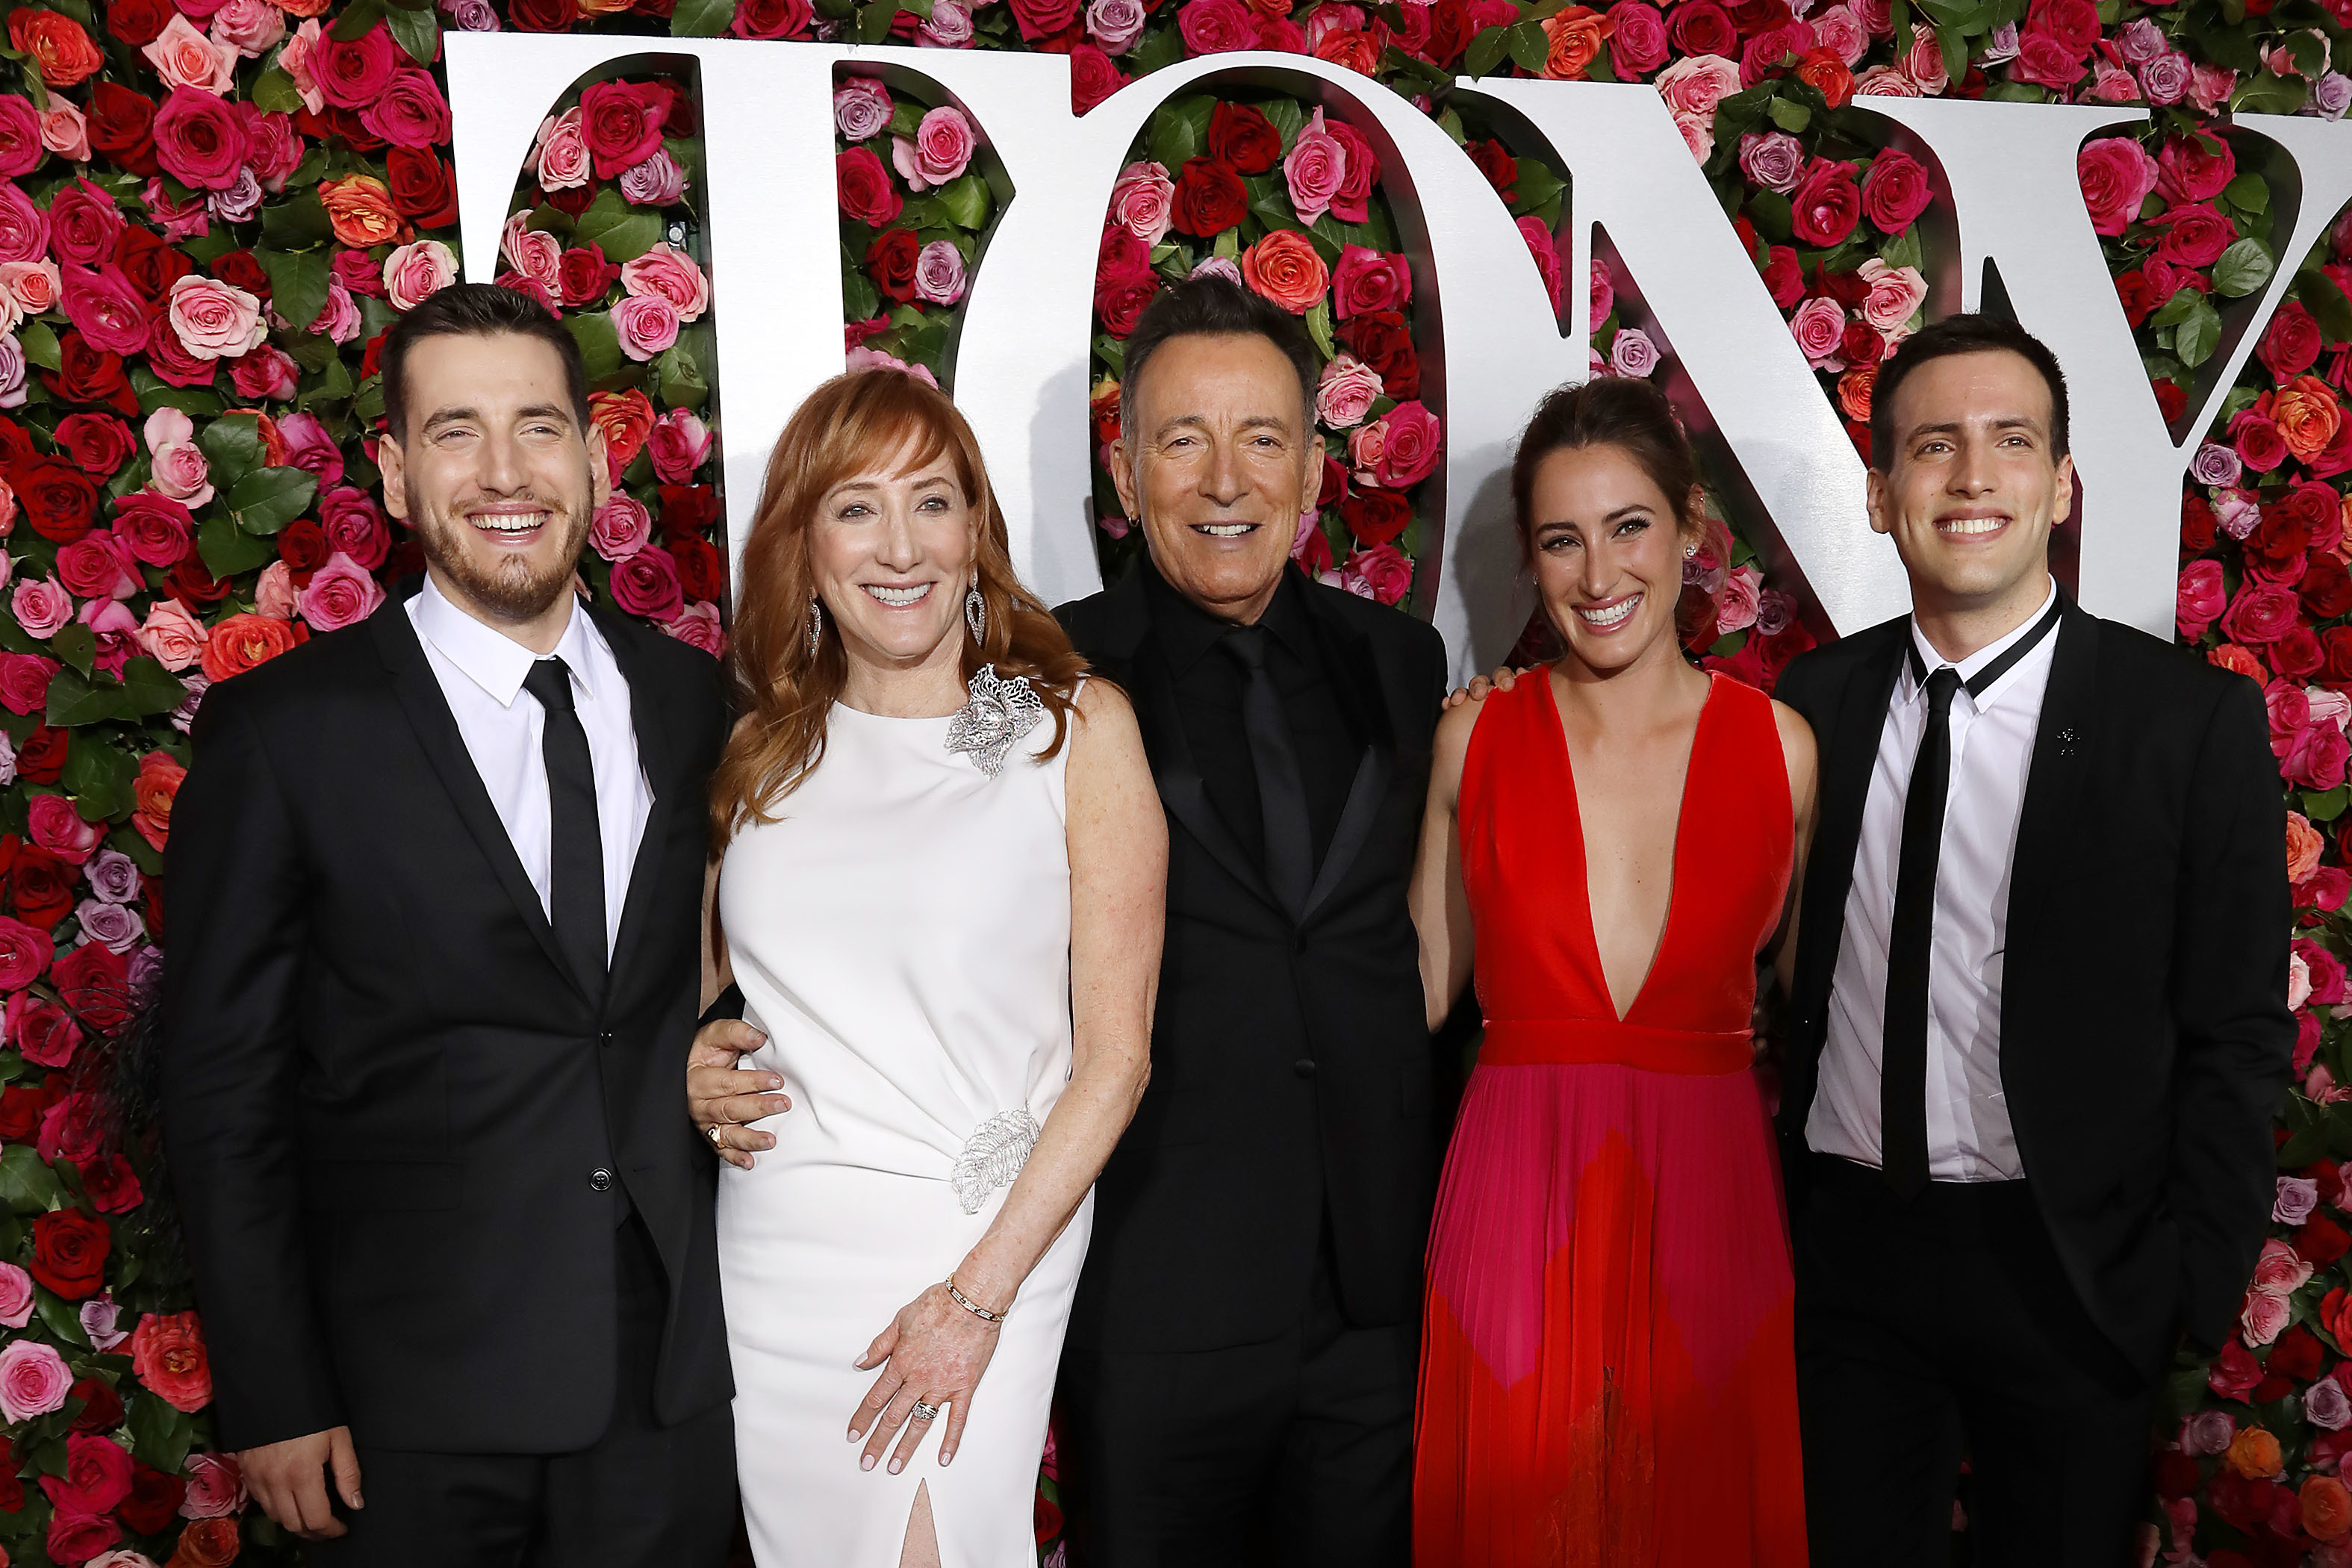 <p>Kids Evan, Jessica and Sam Springsteen -- who are all in their 20s now -- hit the red carpet to <a href="https://www.wonderwall.com/news/see-bruce-springsteens-wife-and-3-kids-supporting-him-tony-awards-photos-patti-scialfa-evan-jessica-sam-3014757.article">support dad</a> Bruce Springsteen at <a href="https://www.wonderwall.com/awards-events/red-carpet/2018-tony-awards-red-carpet-3014750.gallery">the 72nd Annual Tony Awards</a> in New York City on June 10, 2018, where he was honored with a special prize for his one-man show, "Springsteen on Broadway." Evan is a sometime singer-songwriter and Boston College graduate who works as a program director and festival producer at Sirius XM Radio. Jessica is an elite equestrian and show-jumping champion horse rider. Sam is a New Jersey firefighter.</p>